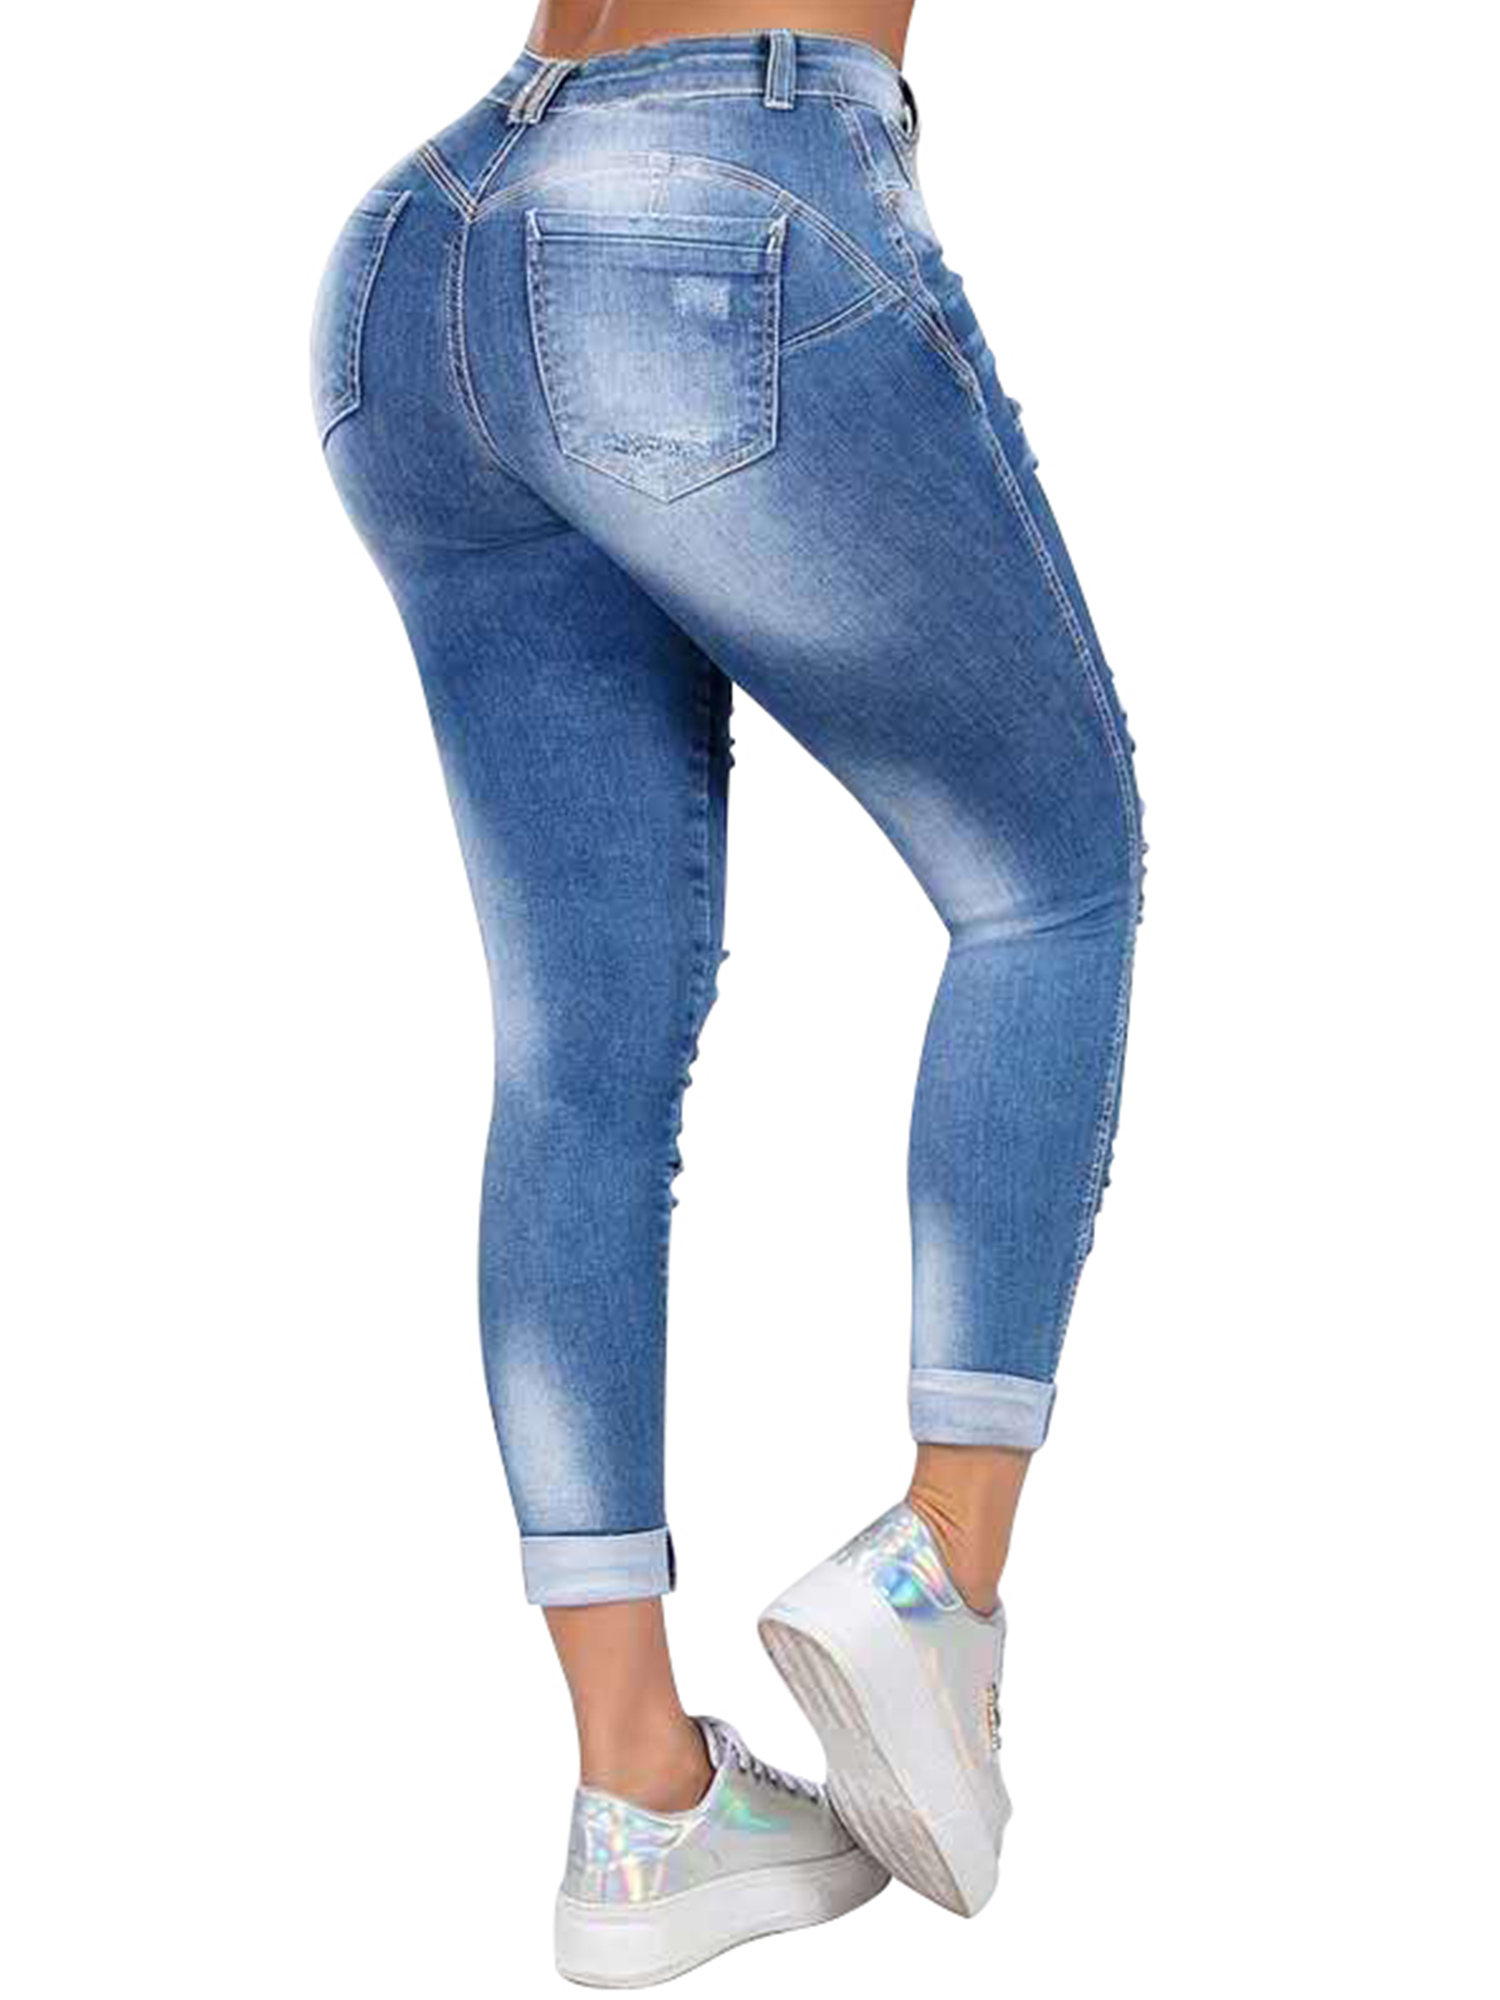 Ripped Distressed Jeans For Women Mid Rise Skinny Slim Fit Jeans Ladies Cut Denim Trouser Pants For Juniors - image 3 of 3